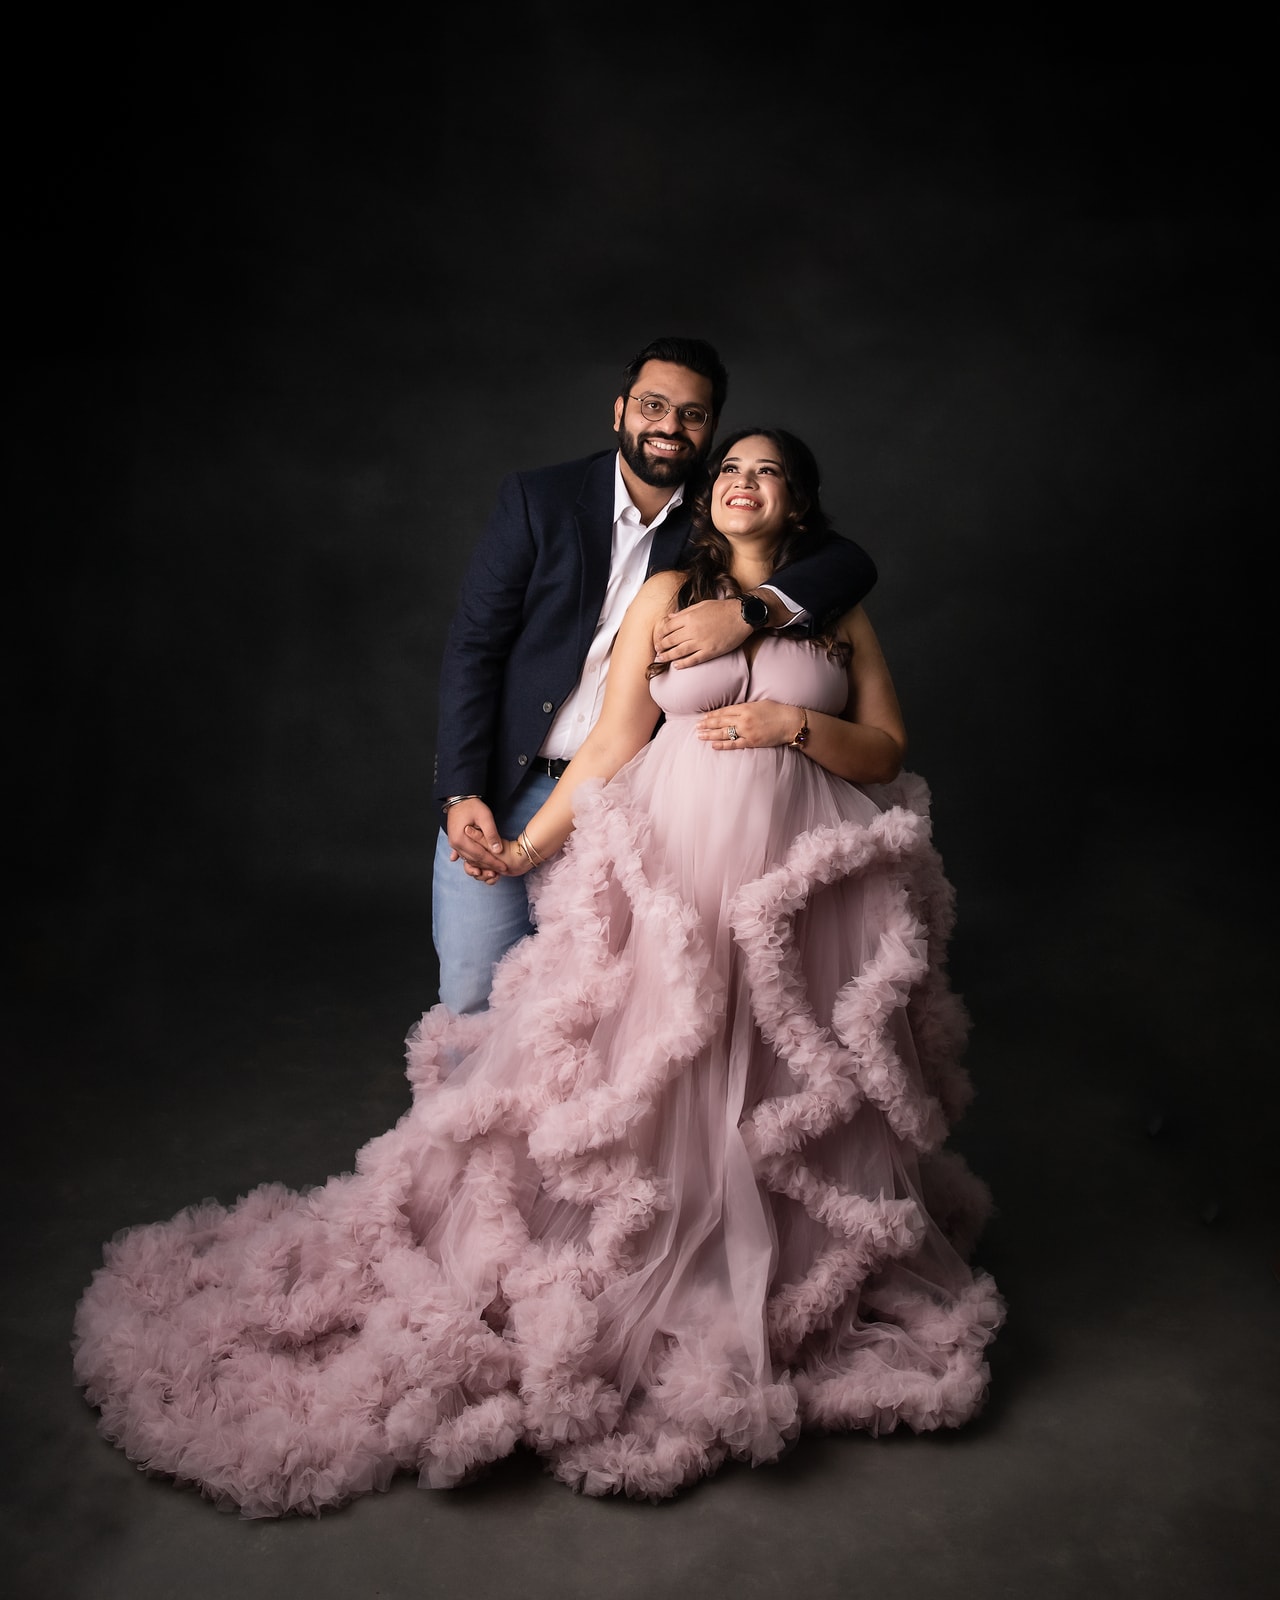 Finest Maternity Photoshoot in India